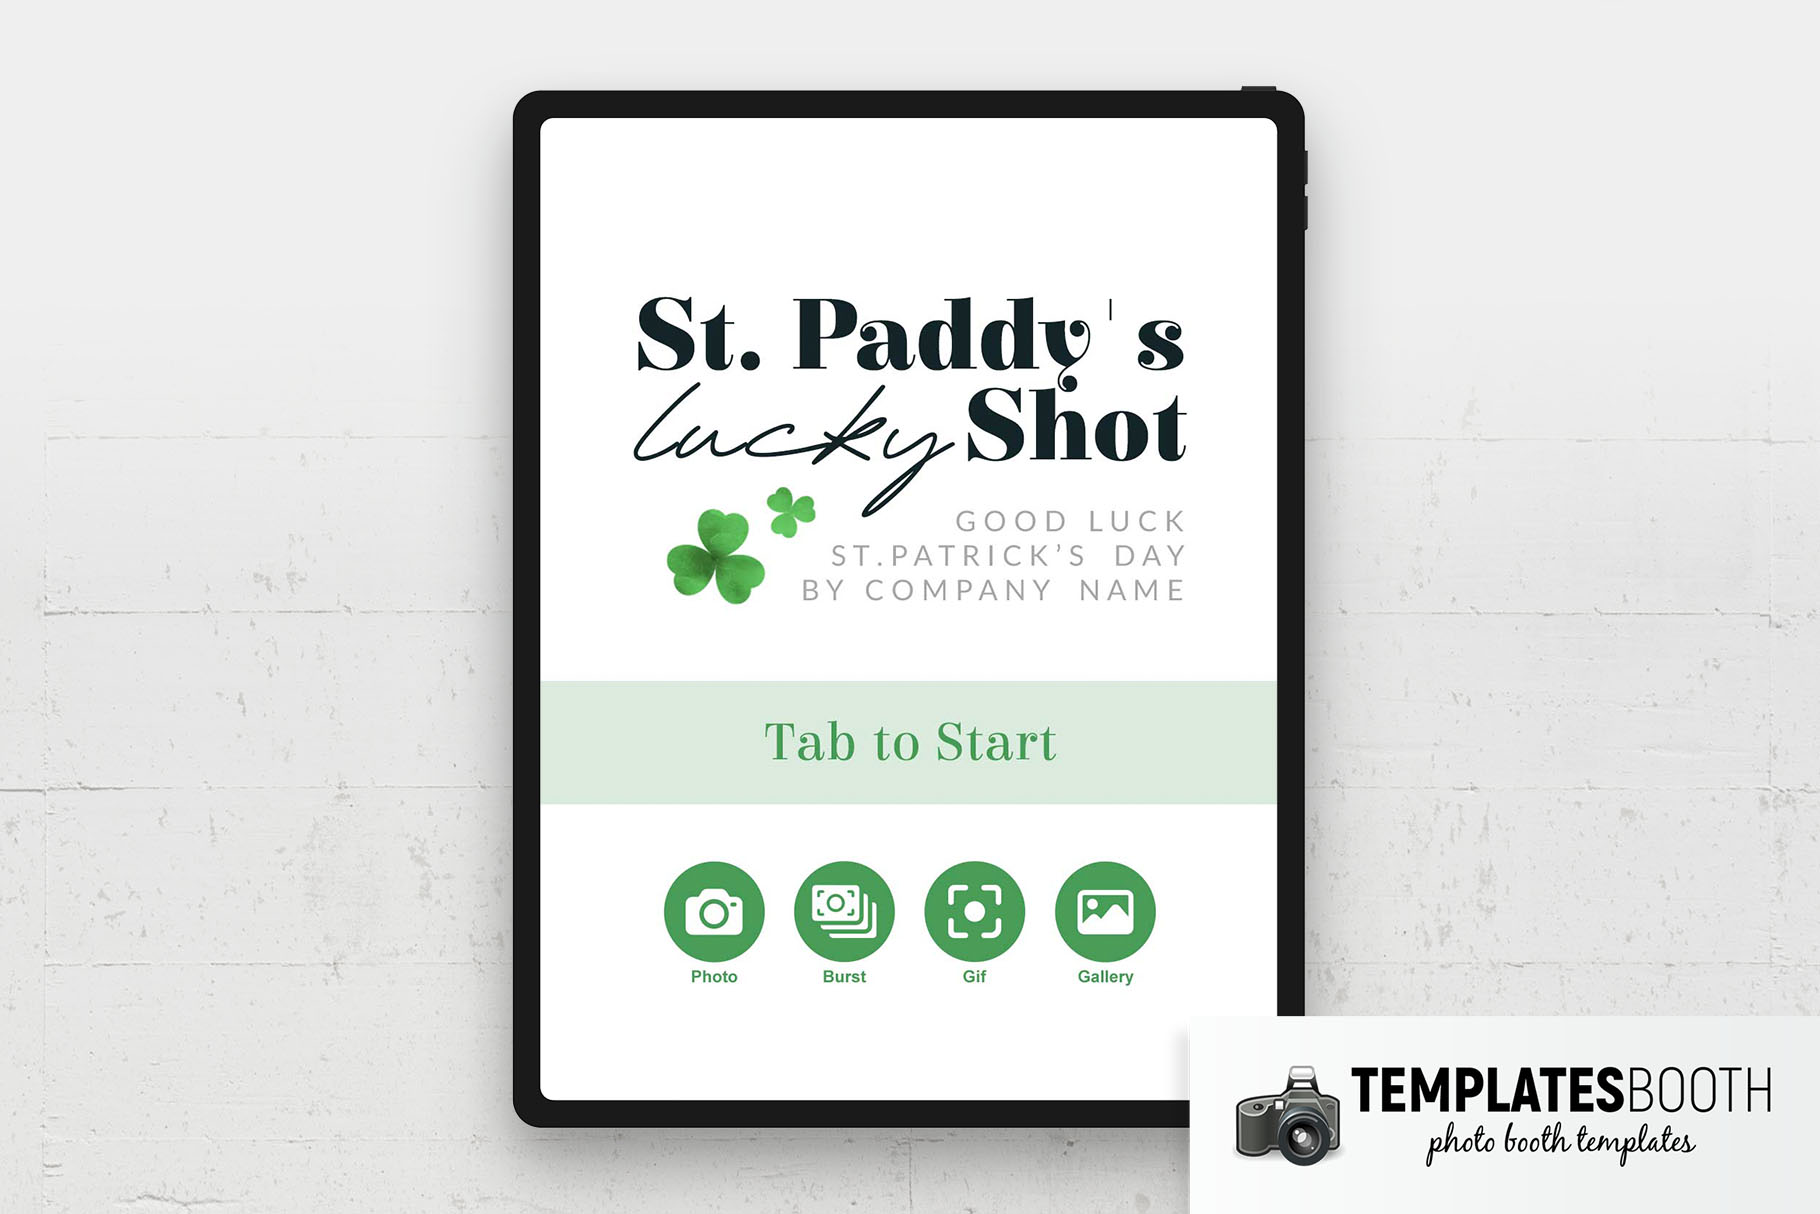 Minimal St. Patrick's Day Photo Booth Welcome Screen